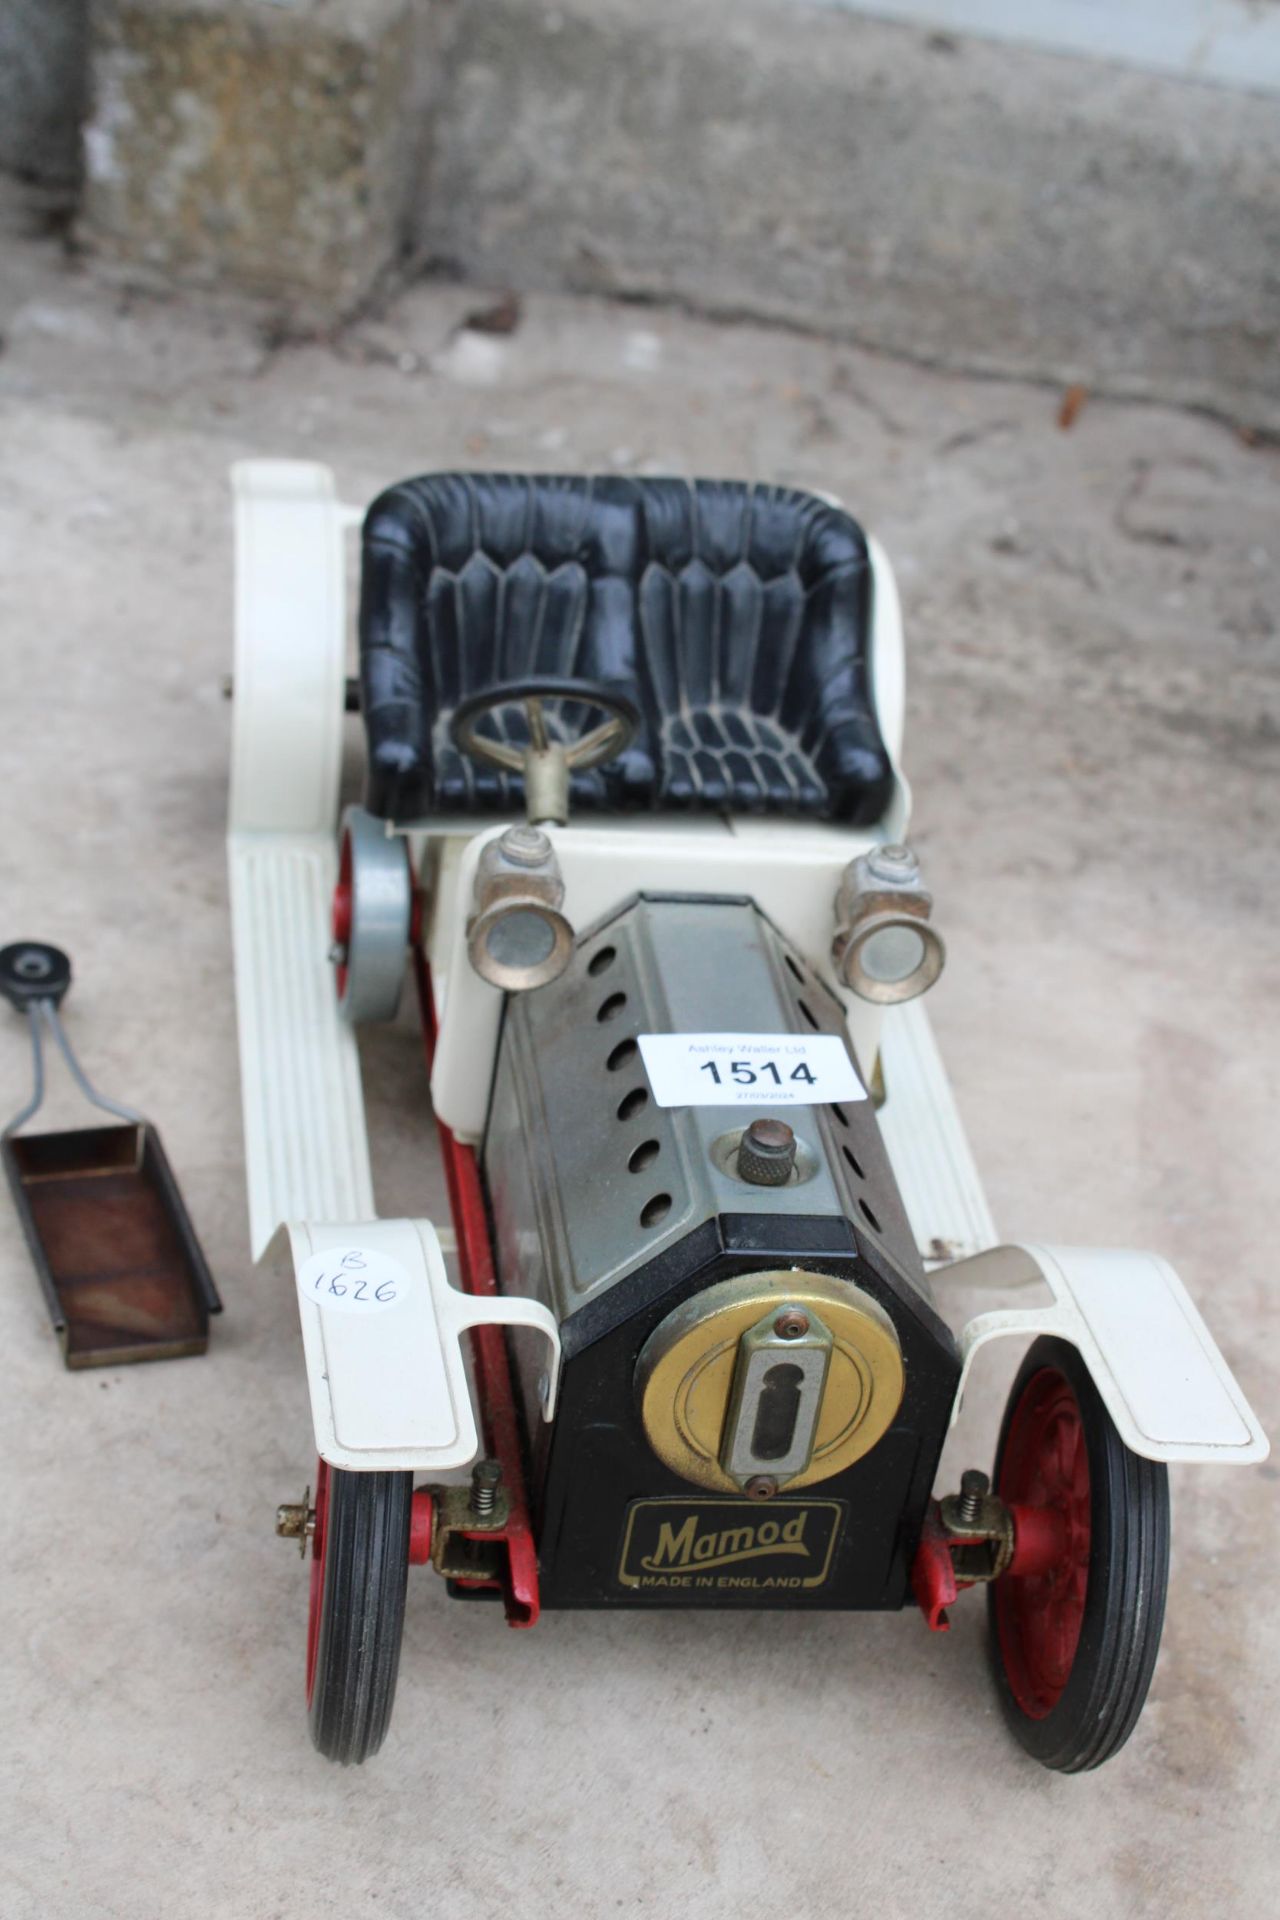 A VINTAGE MAMOD TIN PLATE STEAM POWERED CAR - Image 2 of 4